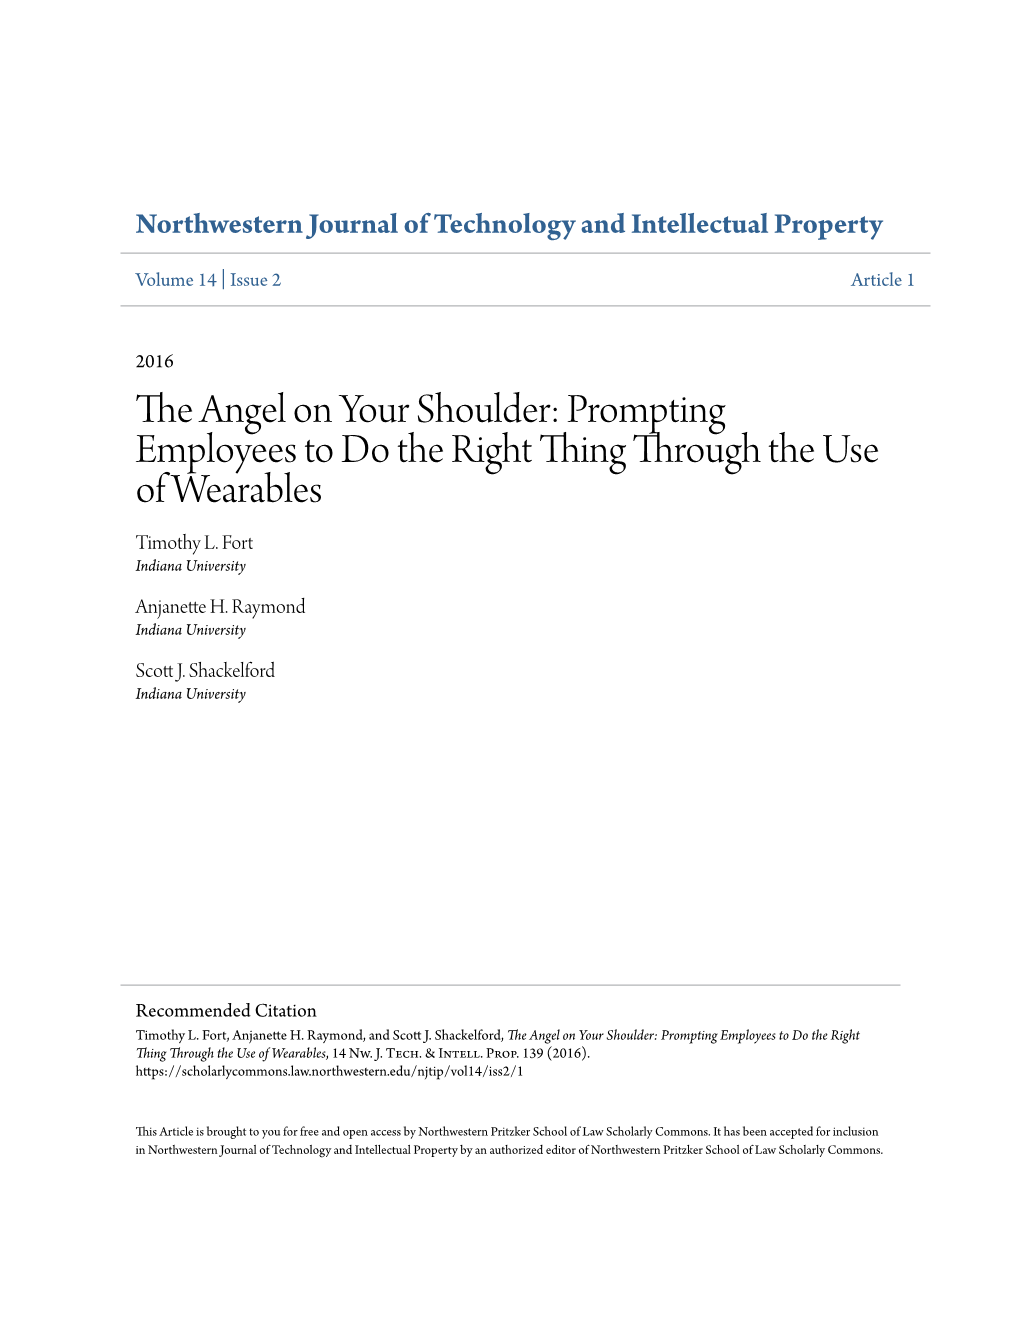 the-angel-on-your-shoulder-prompting-employees-to-do-the-right-thing-through-the-use-of